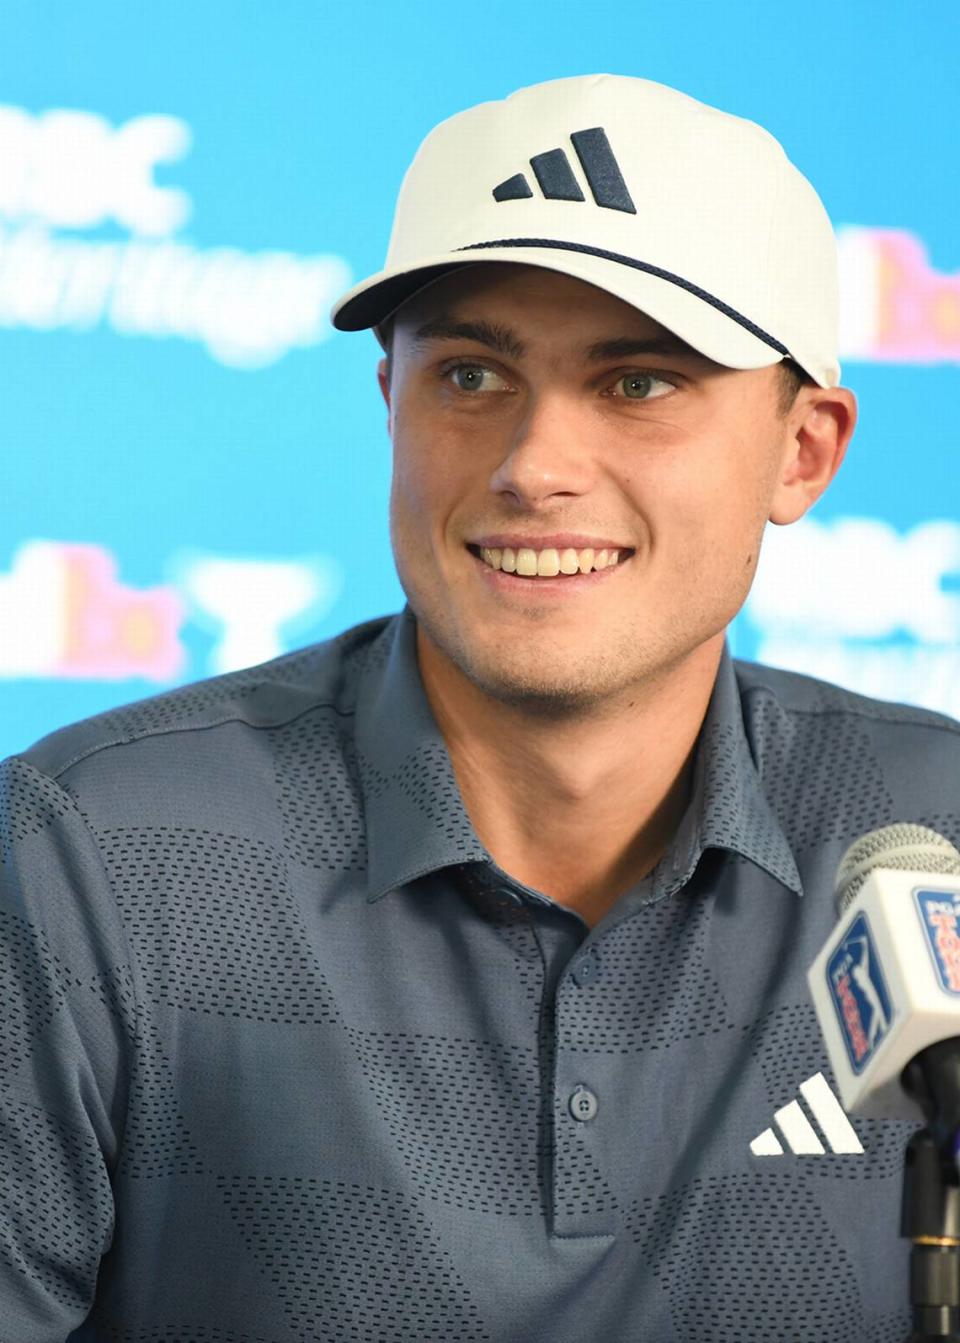 World no. 7 Ludvig Aberg addresses the media at The RBC Heritage Wednesday before the start of play in the 66th playing of the tournament at Harbour Town Golf Links in Hilton Head SC.